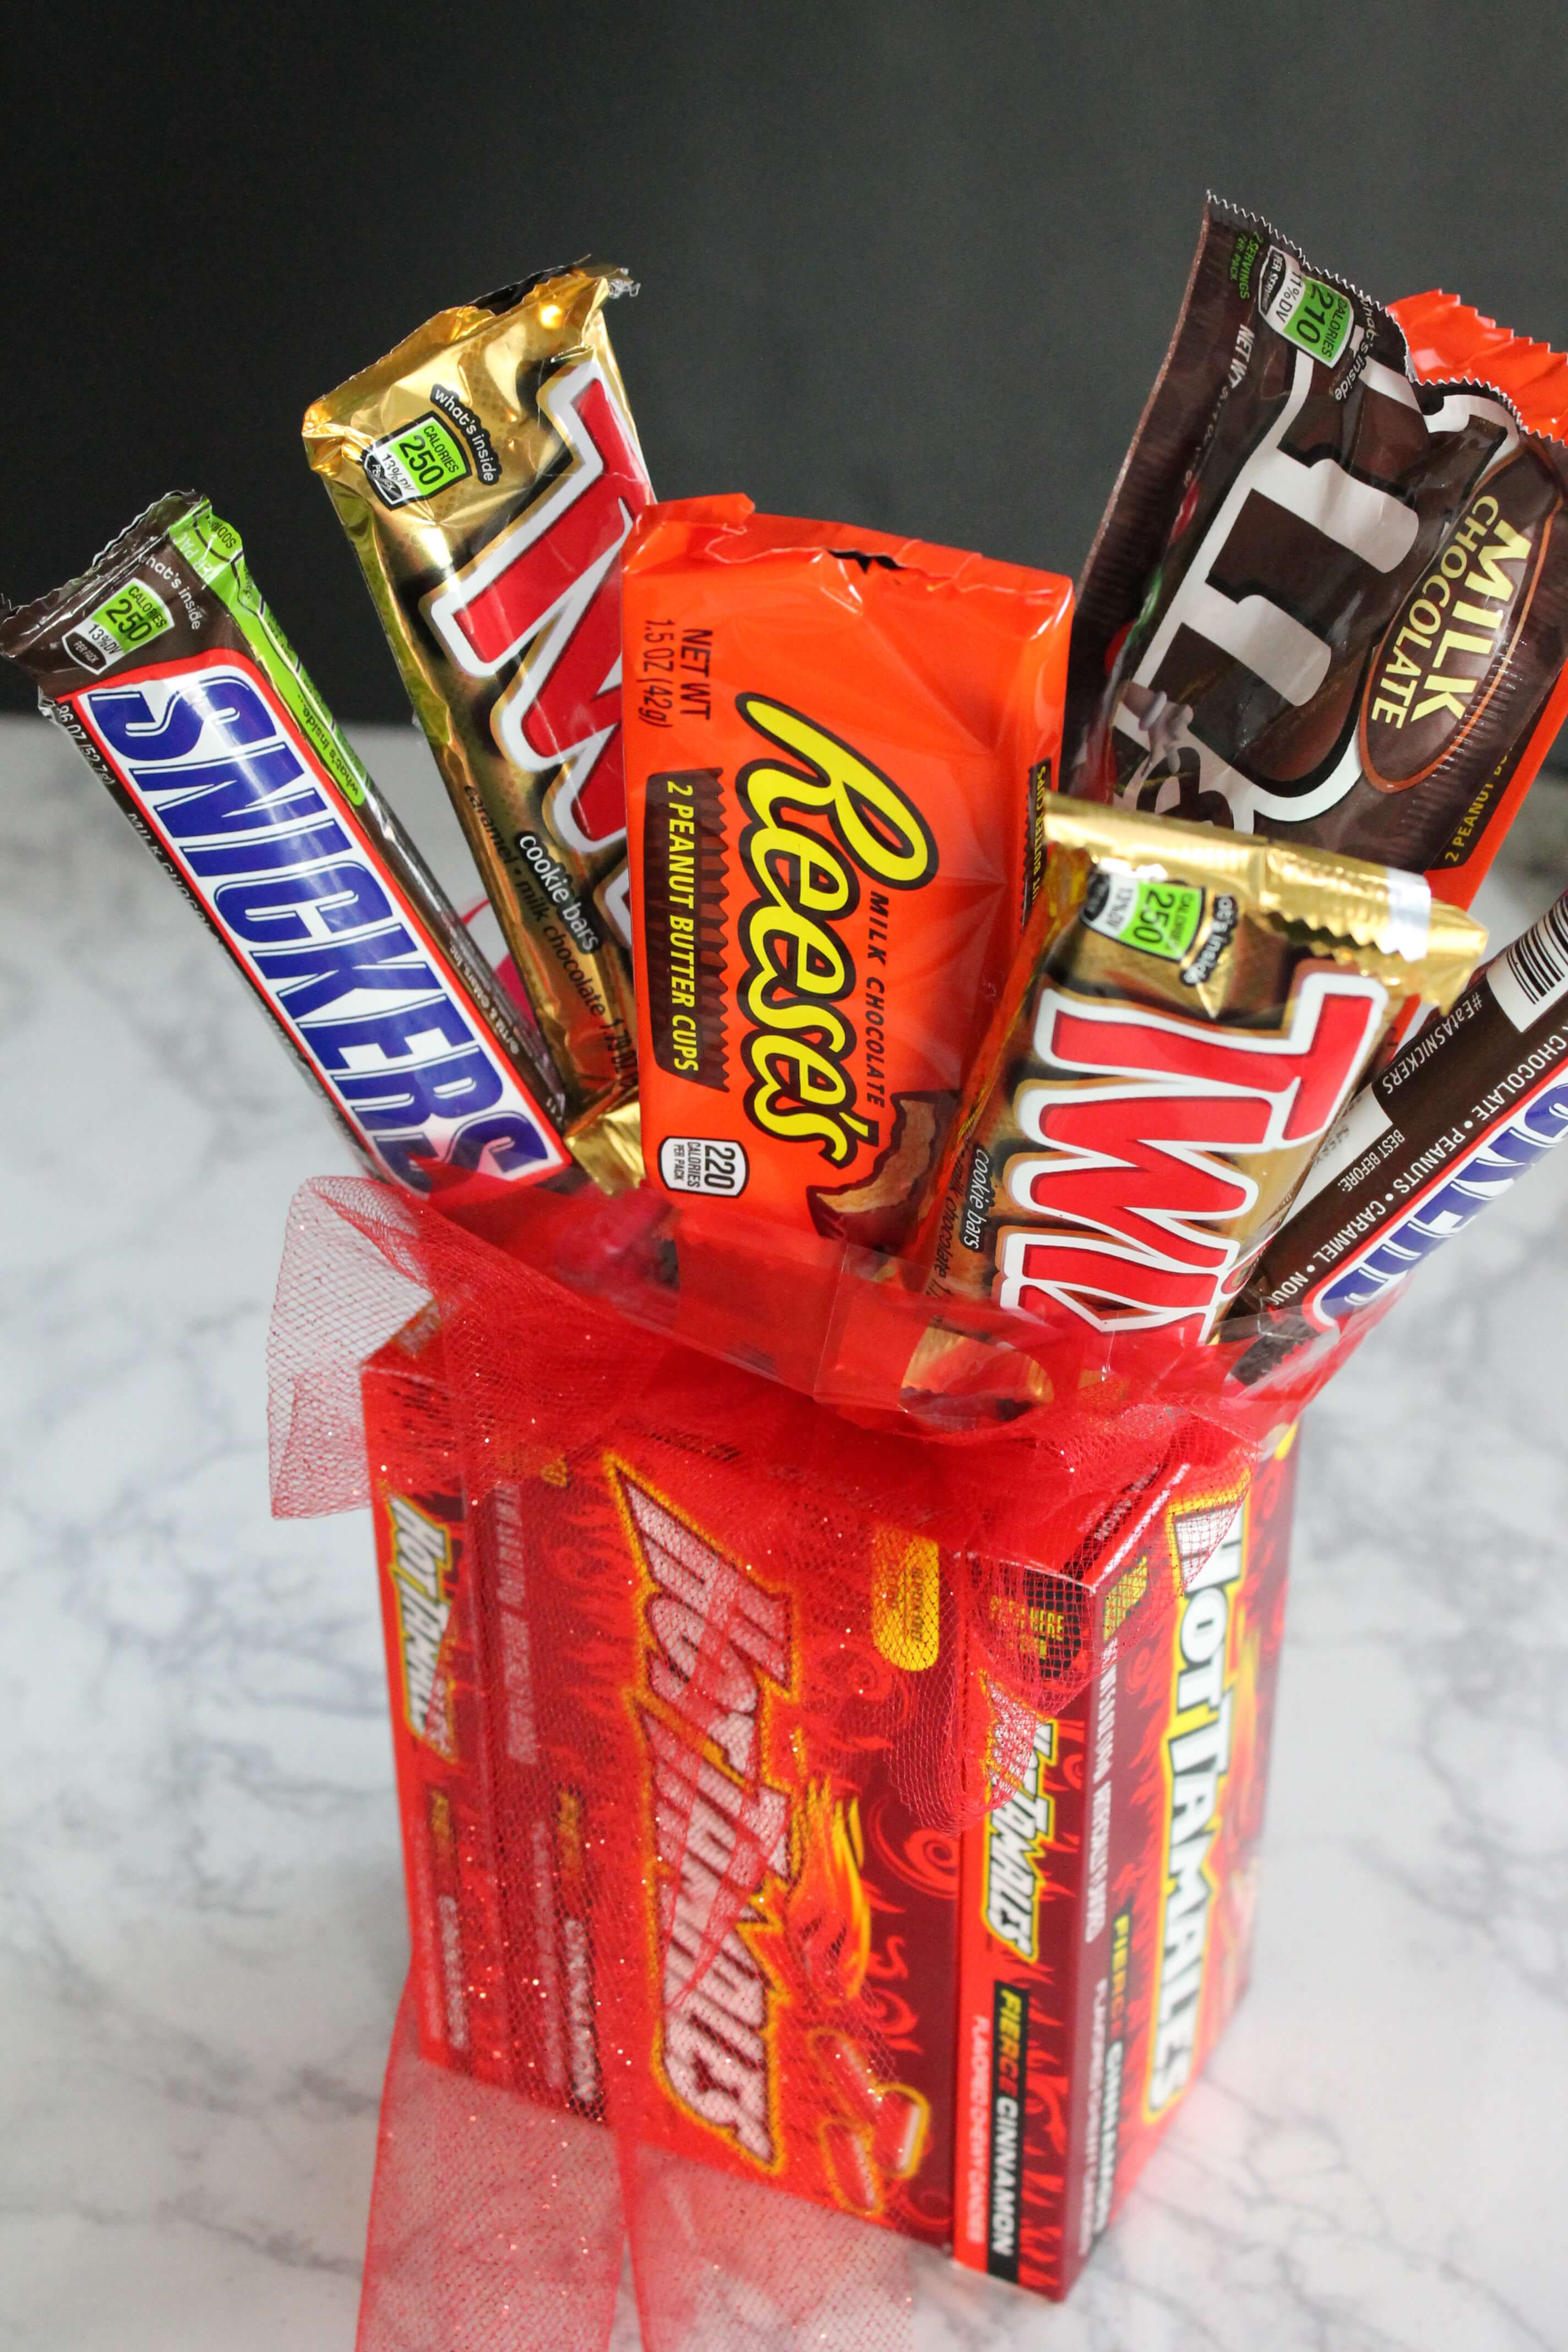 Celebrate With These 20 DIY Candy Bouquets! \u2013 OBSiGeN